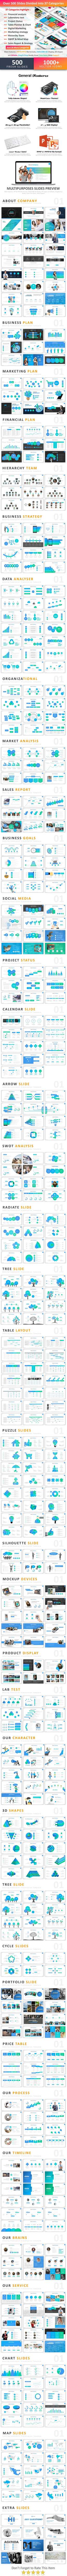 GraphicRiver 2018 Project Powerpoint 21120955